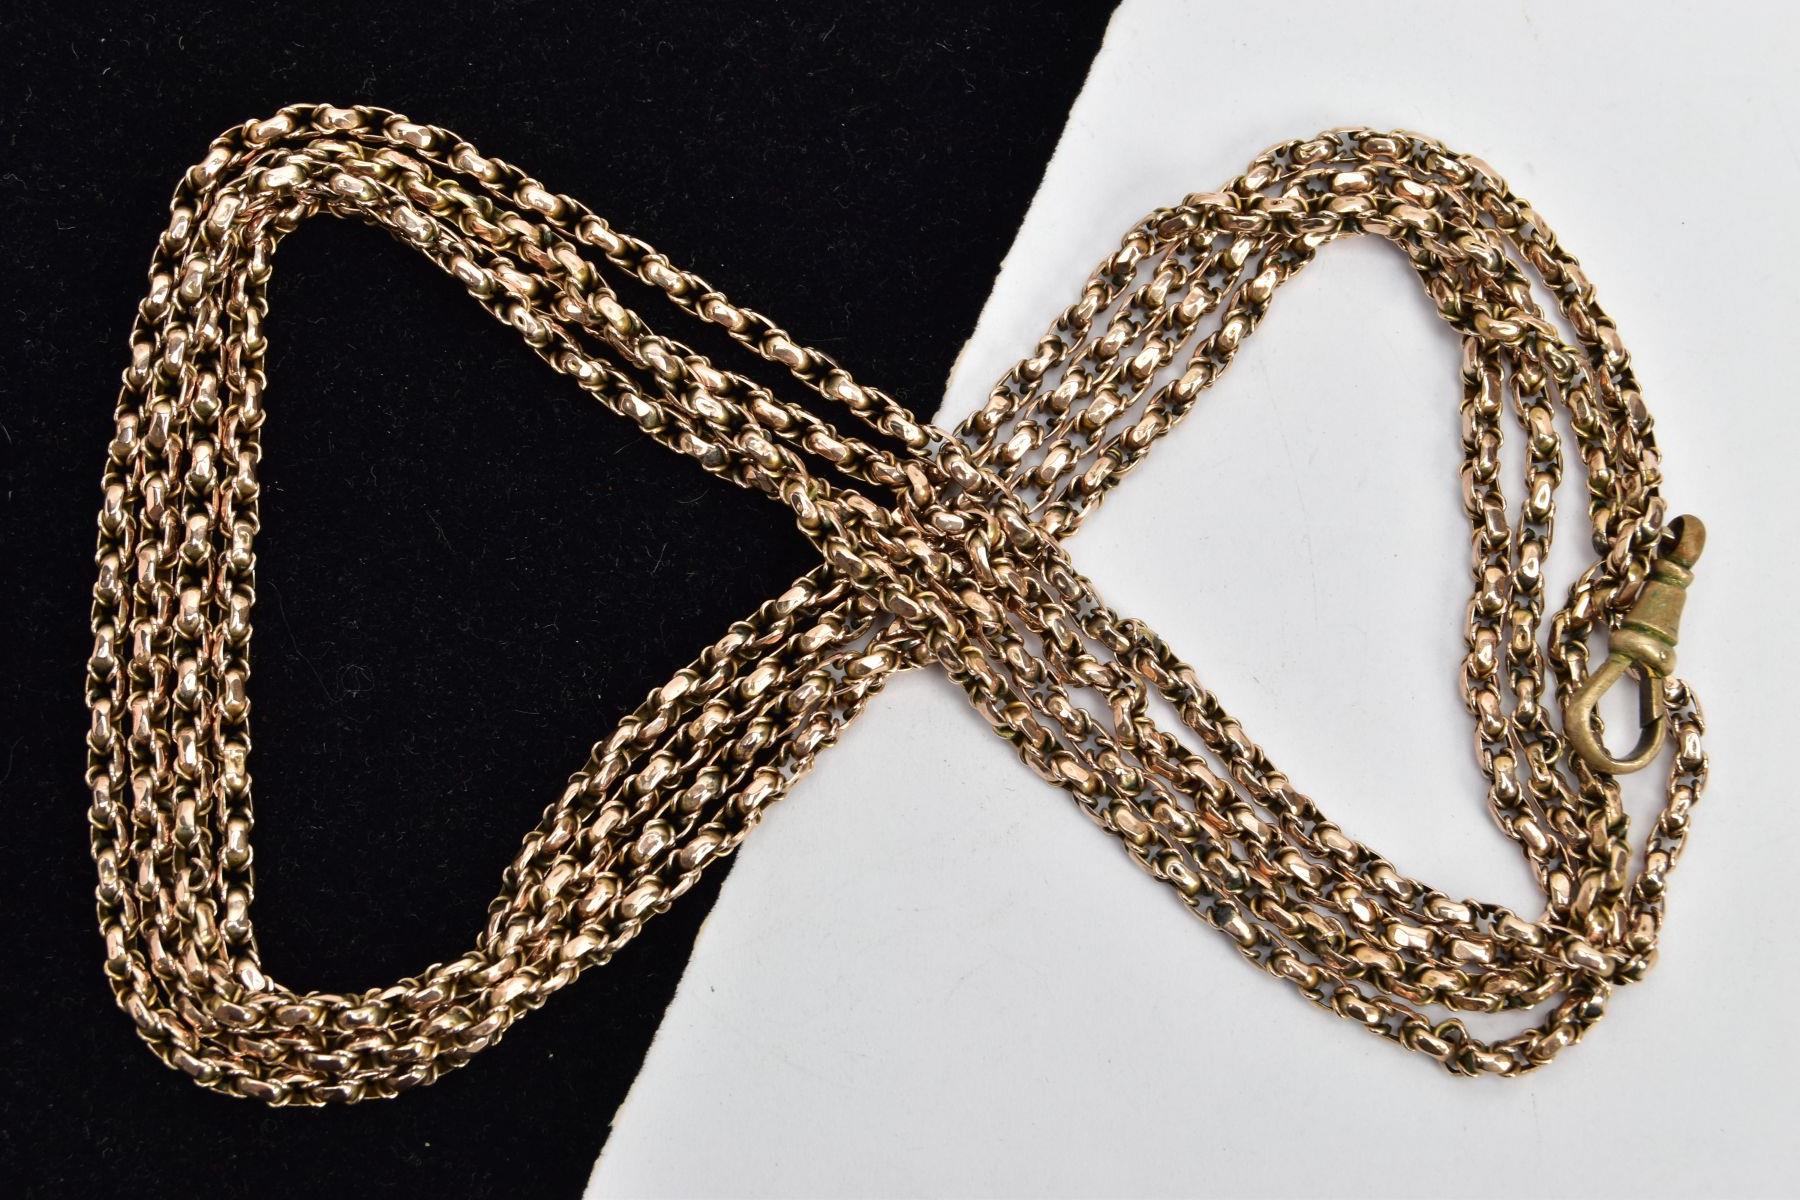 A YELLOW METAL LONGUARD CHAIN, belcher style chain, one link mounted with a '9ct' tag, fitted with a